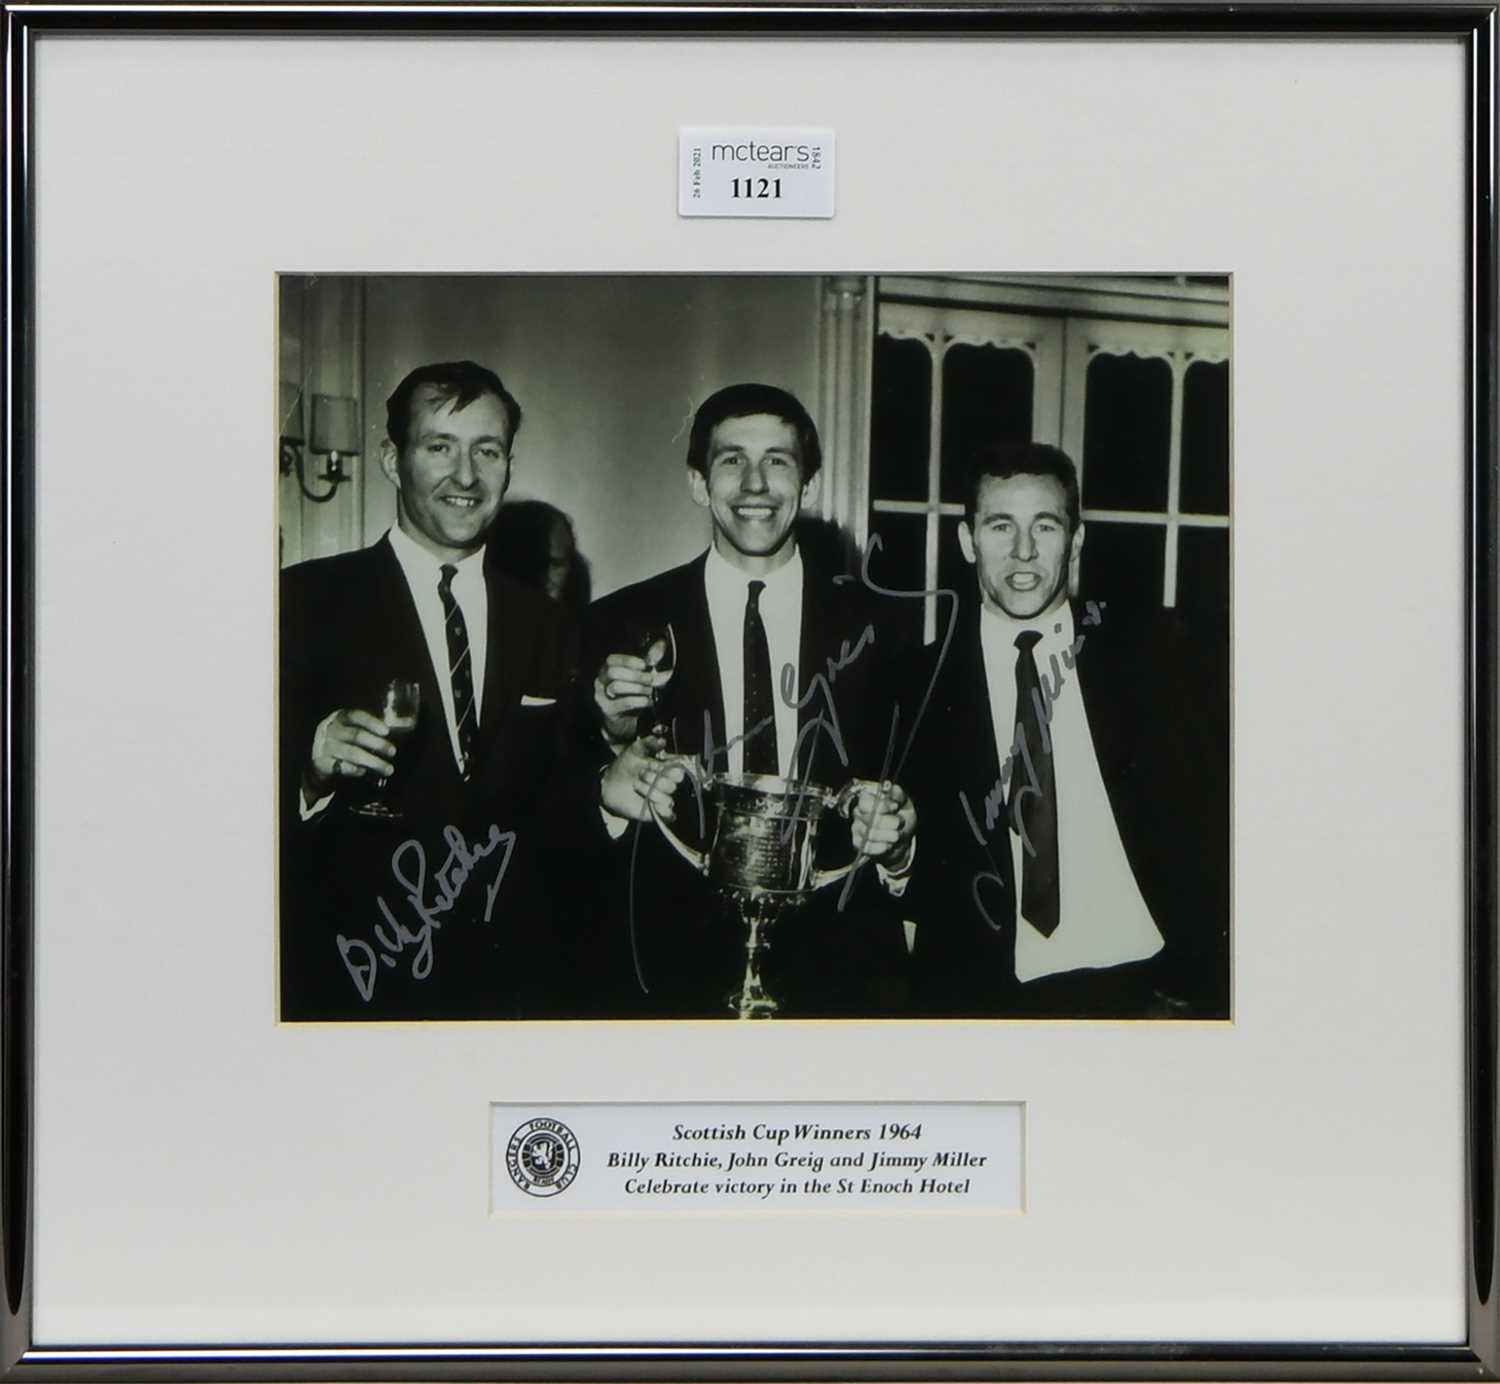 Lot 1121 - A FRAMED SIGNED PHOTOGRAPH OF BILLY RITCHIE, JOHN GREIG AND JIMMY MILLER